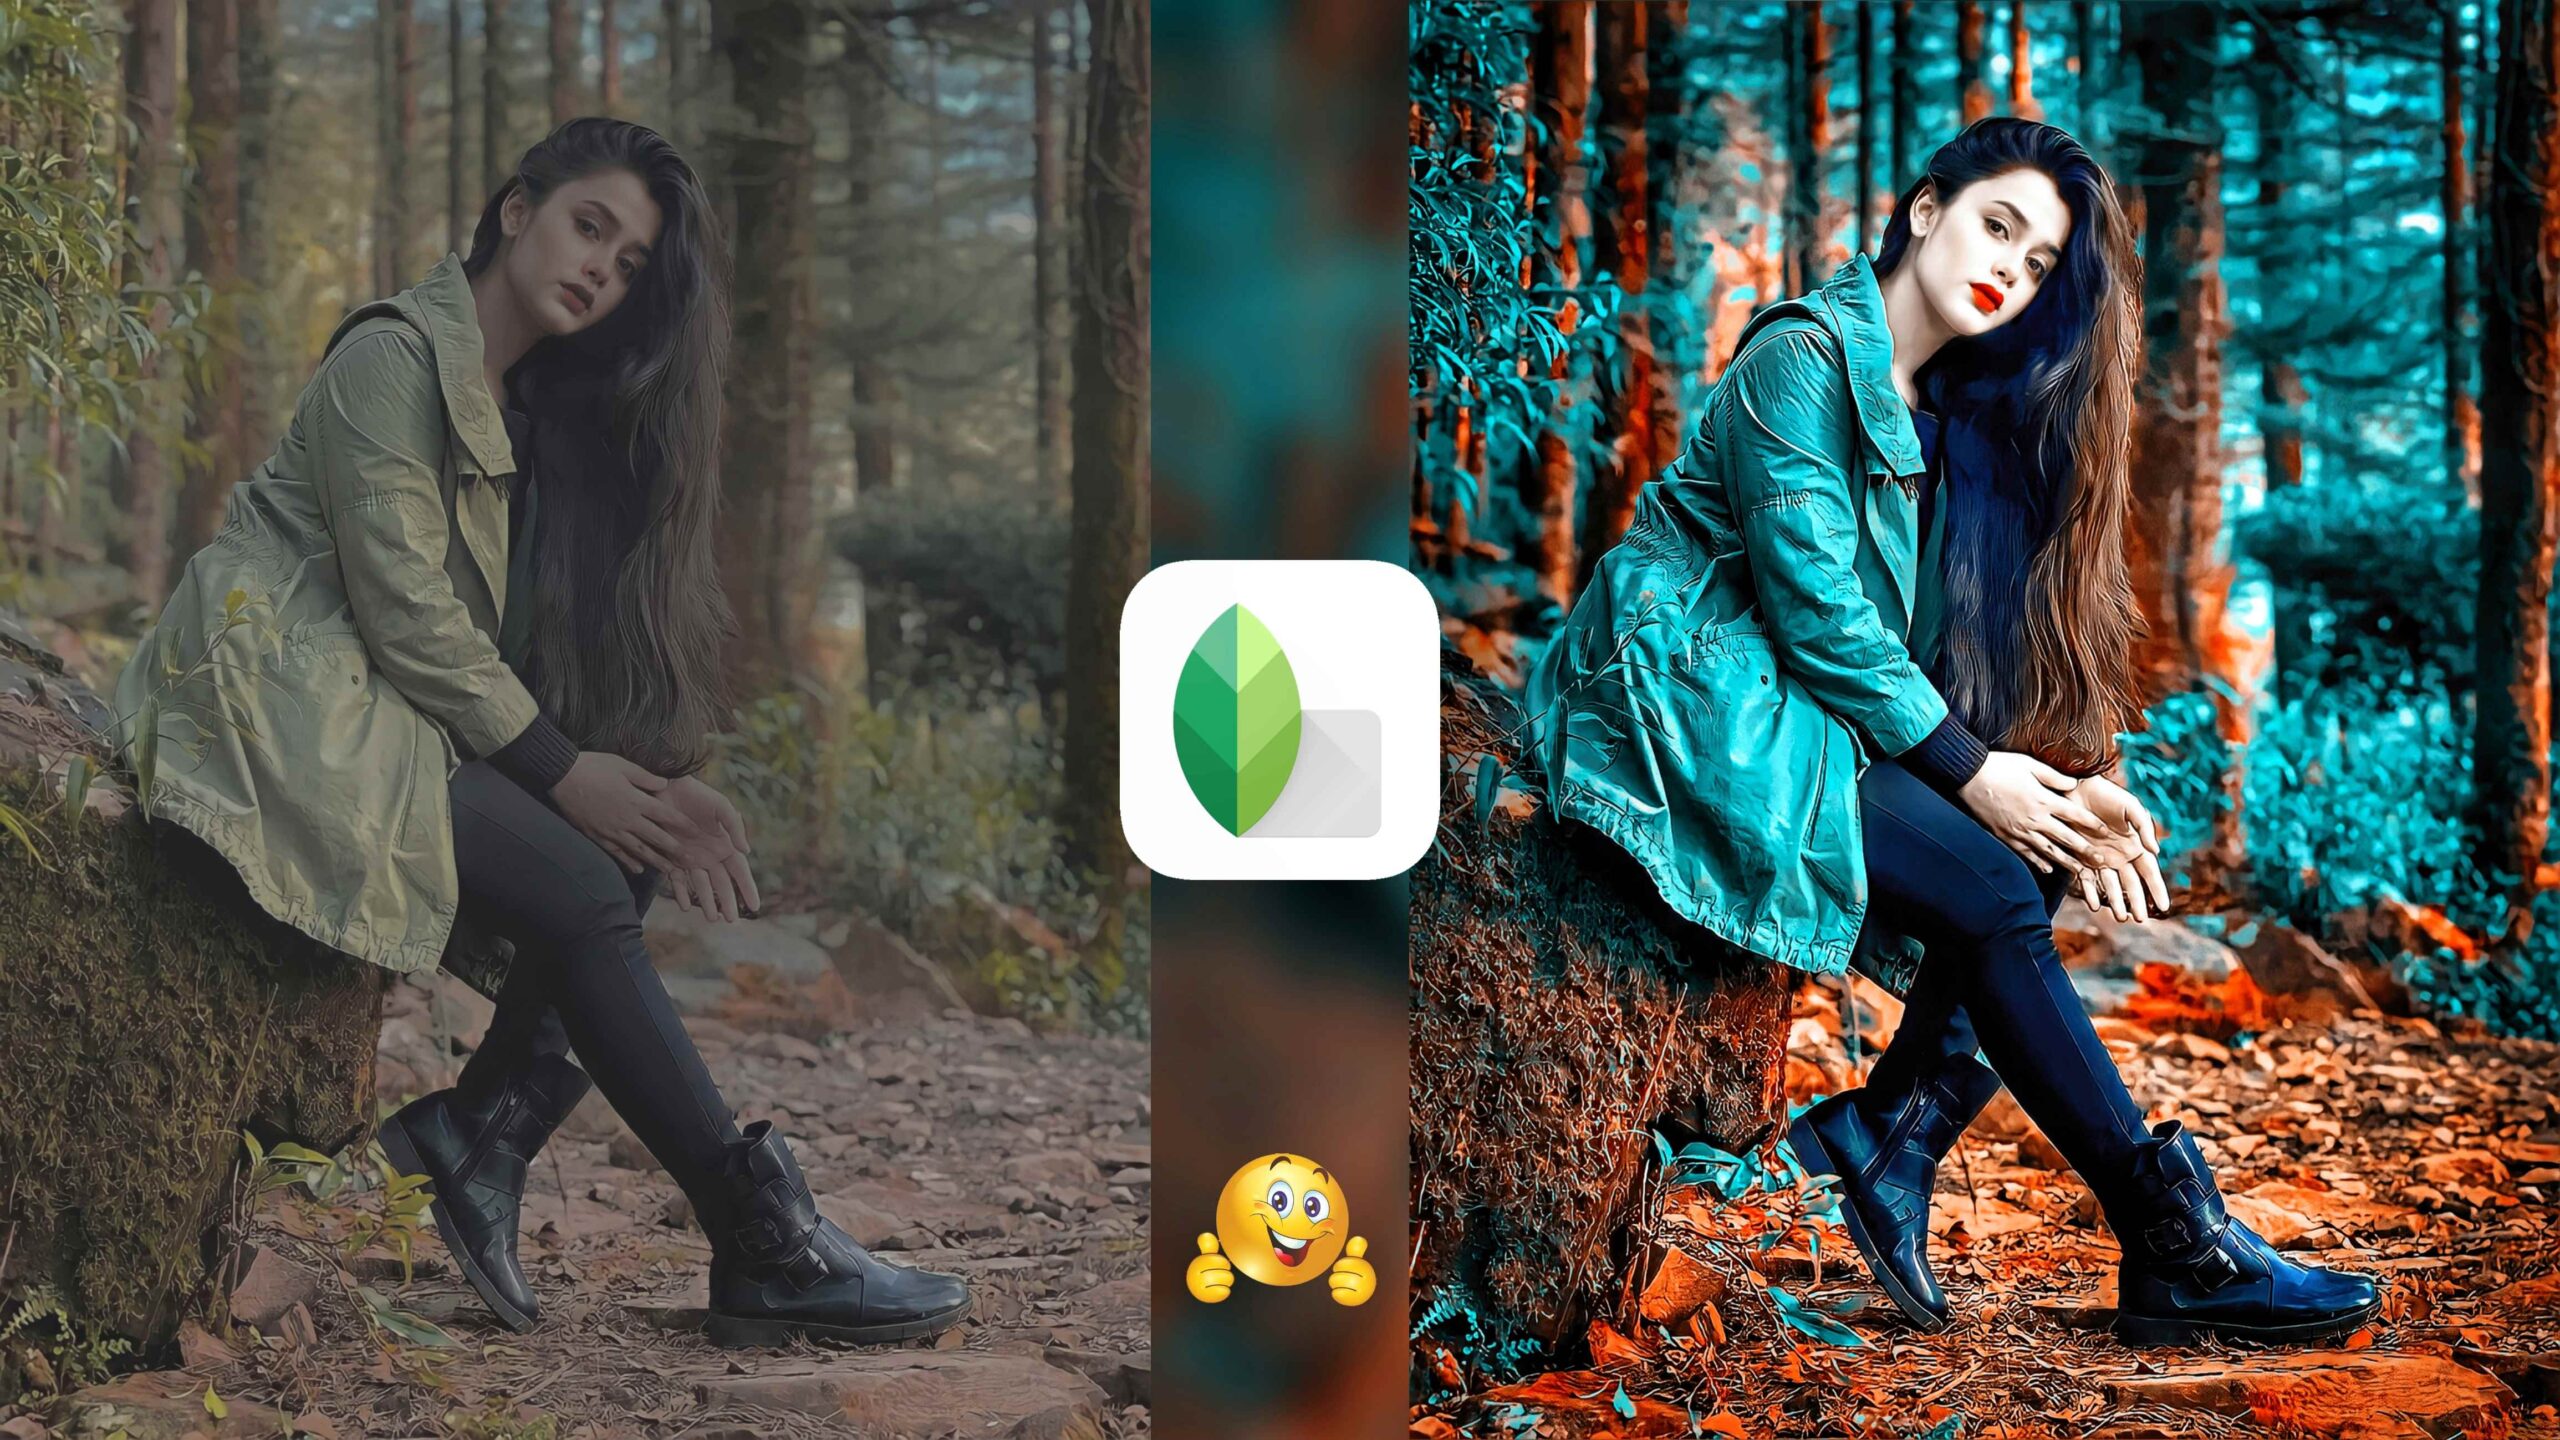 Snapseed New Color Effect Photo Editing Tricks 🔥